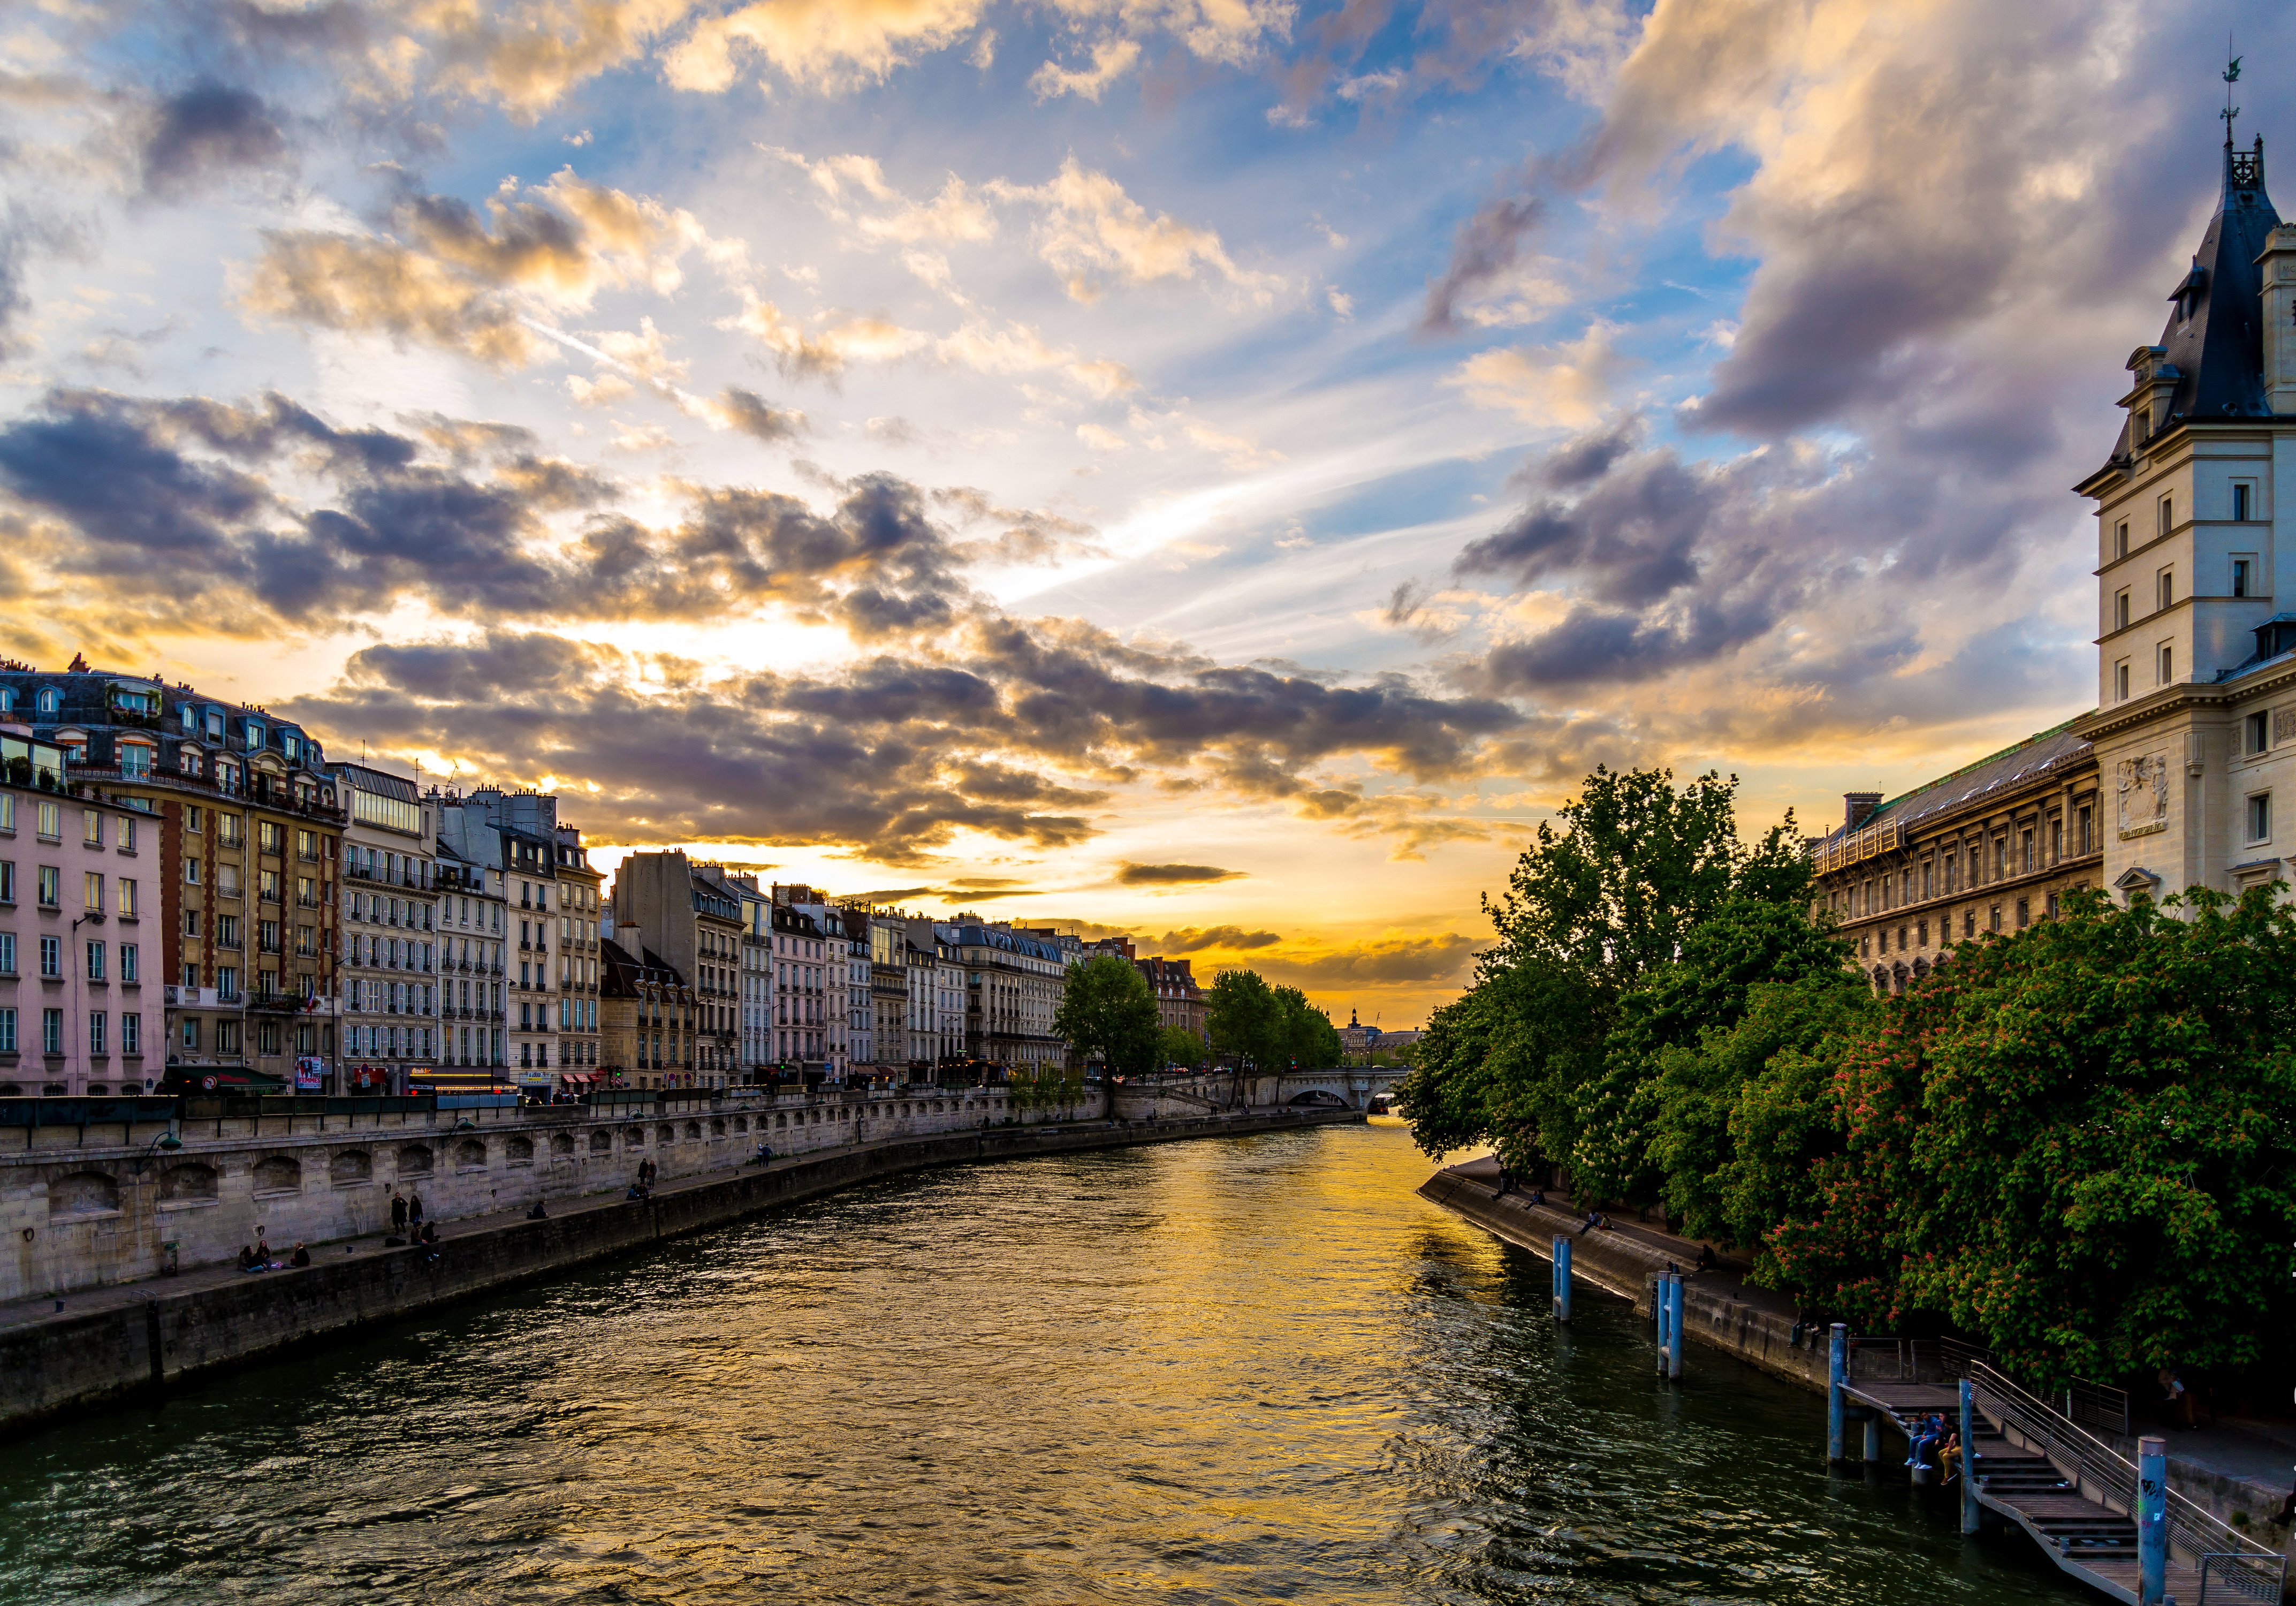 france, Houses, Rivers, Sunrises, And, Sunsets, Sky, Hdr, Paris, Clouds, Canal, Cities Wallpaper